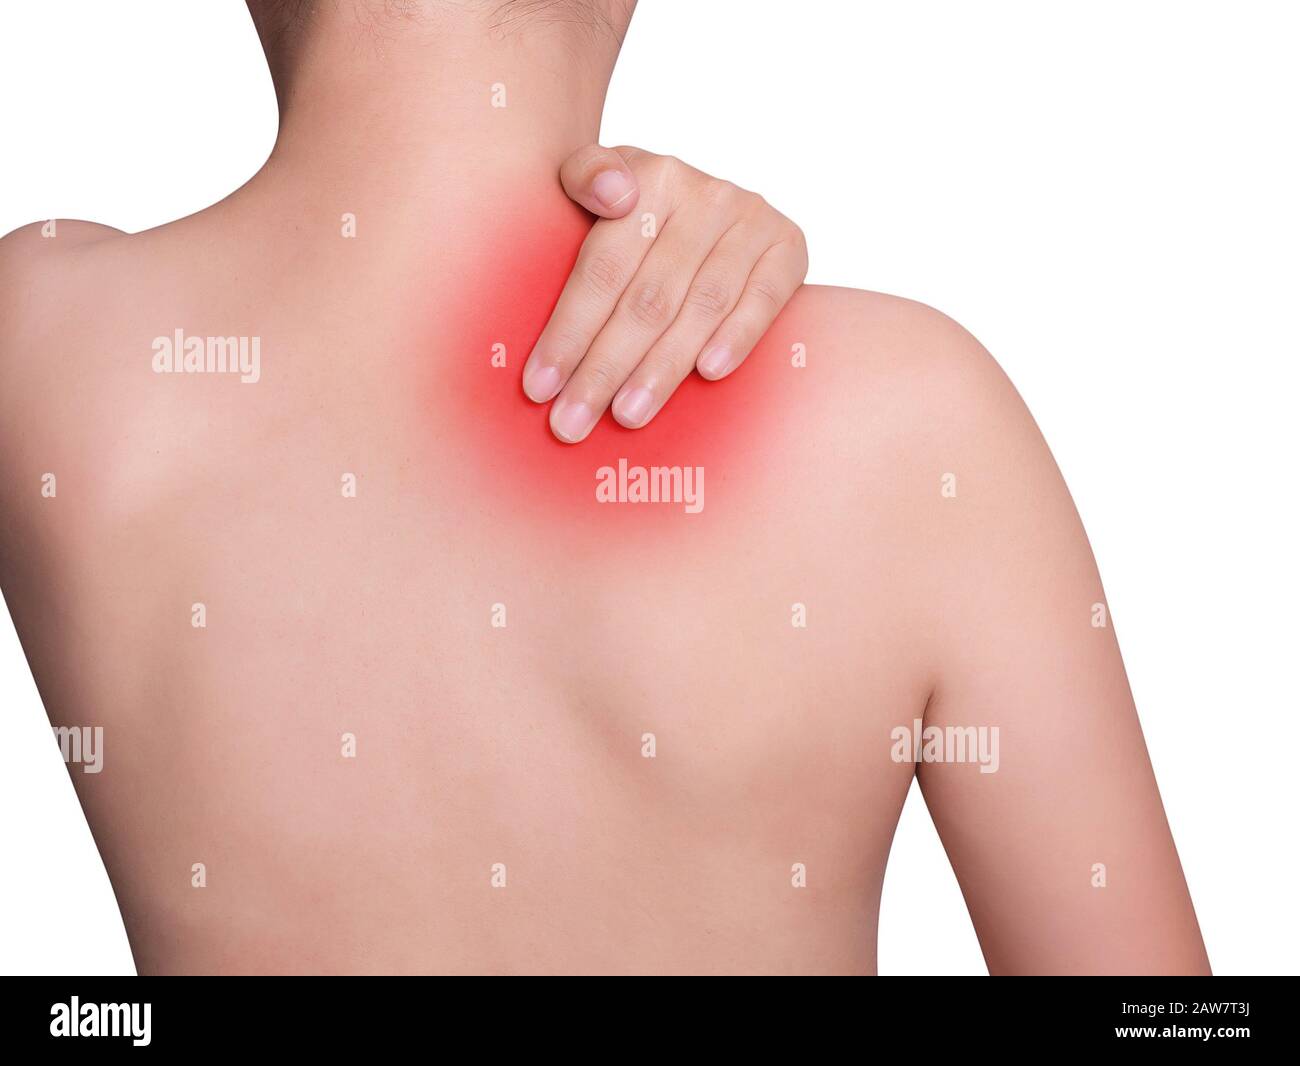 woman suffering from neck pain, shoulder pain. red color highlight at neck and shoulder isolated on white background. health care and medical concept. Stock Photo